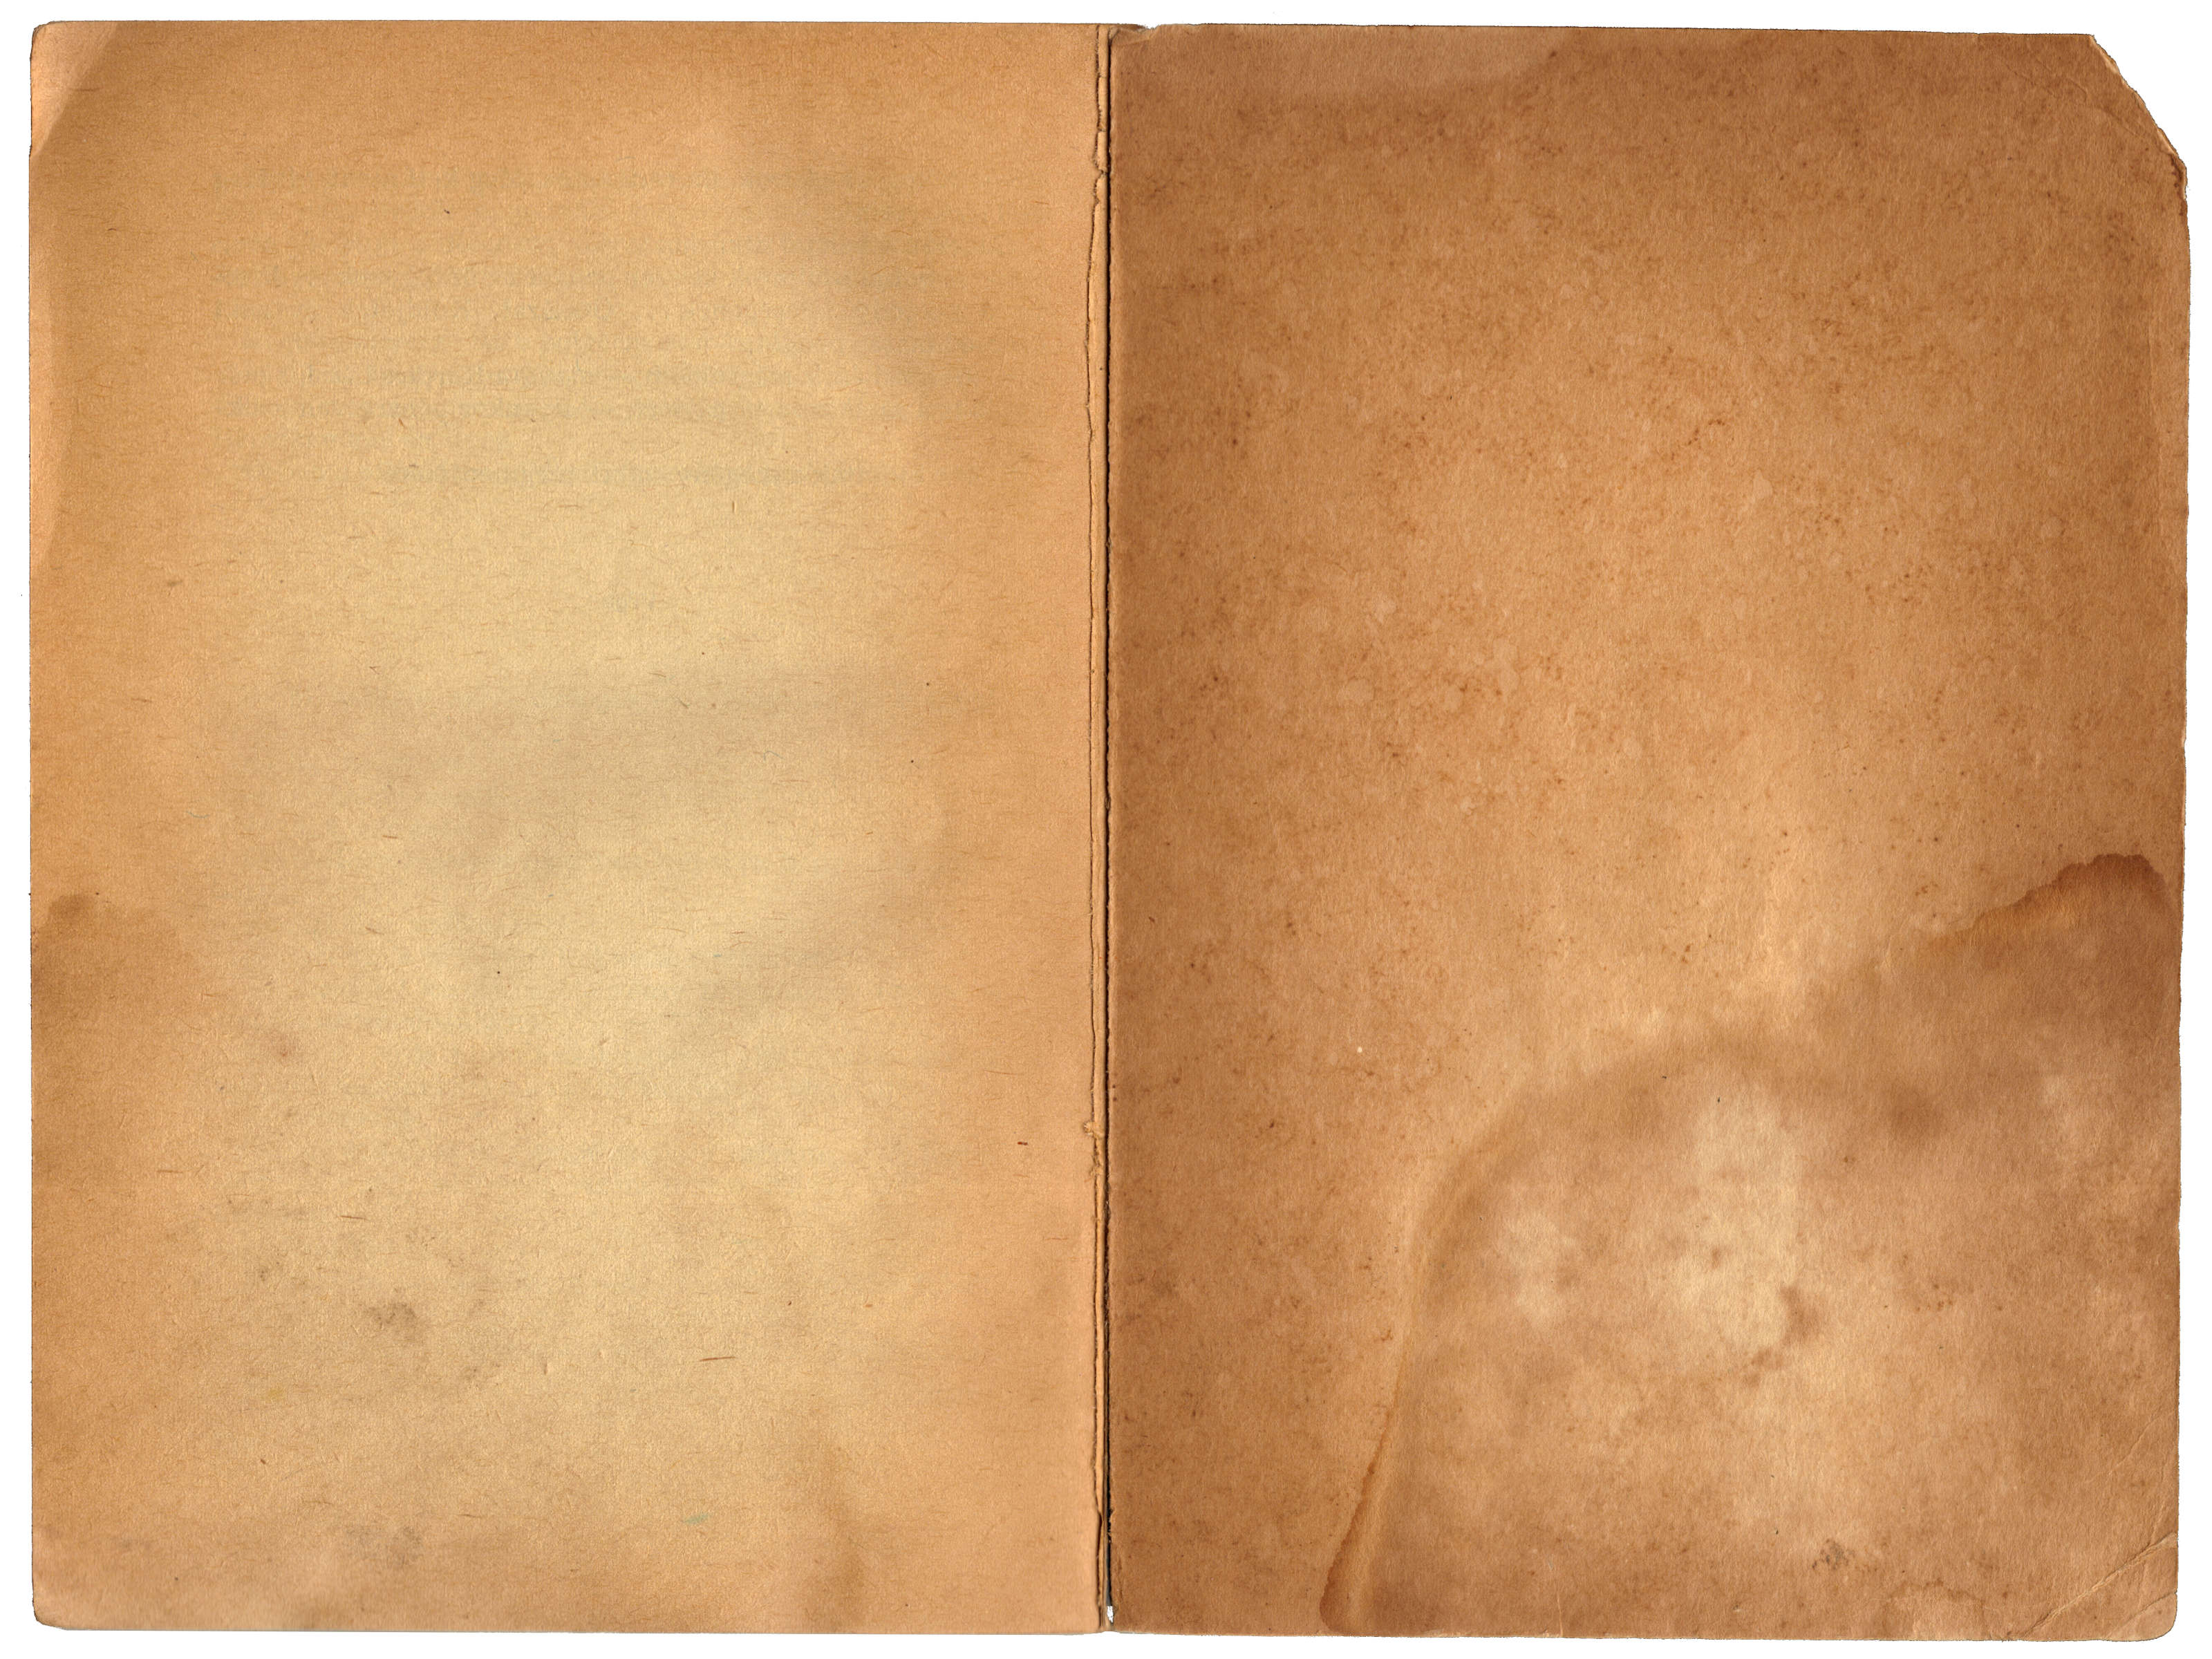 5 Old Book Empty Pages Textures (JPG) Vol. 2 | OnlyGFX.com